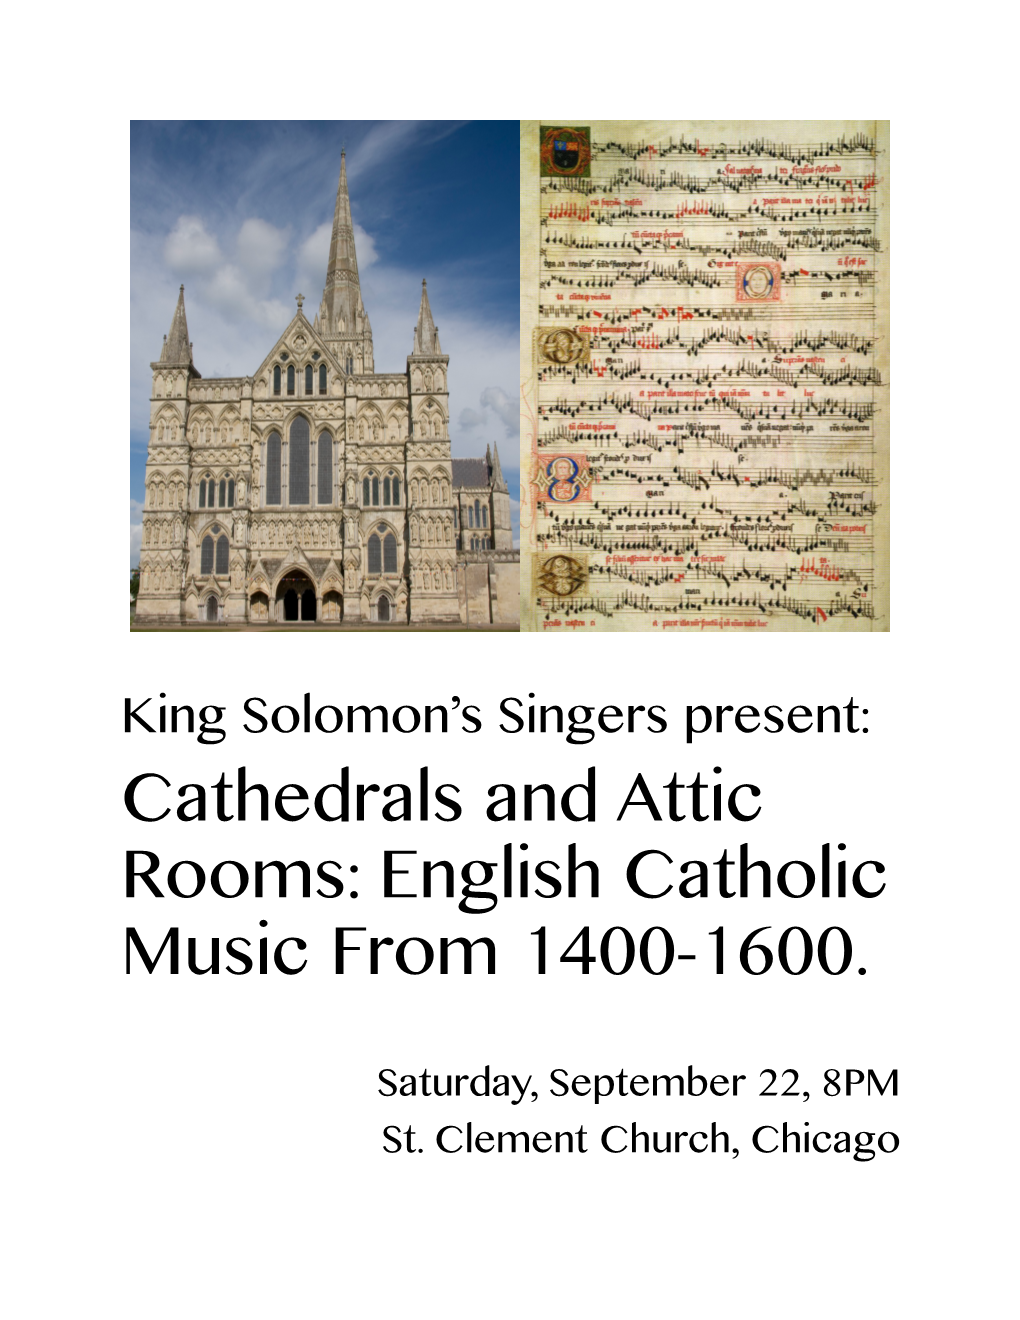 Cathedrals and Attic Rooms: English Catholic Music from 1400-1600